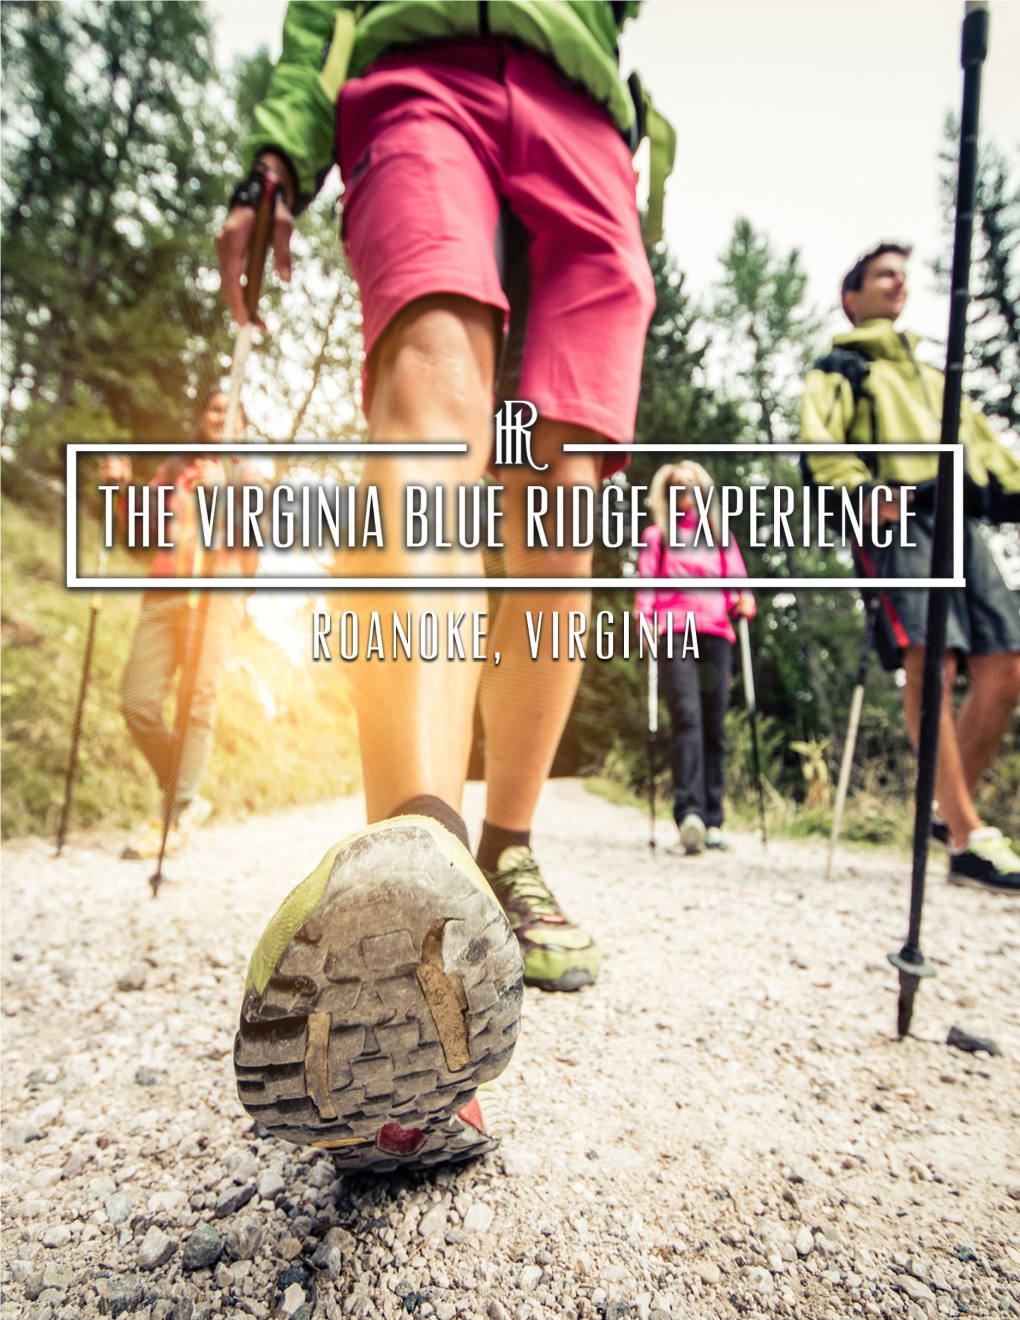 Download the Virginia Blue Ridge Experience Guide